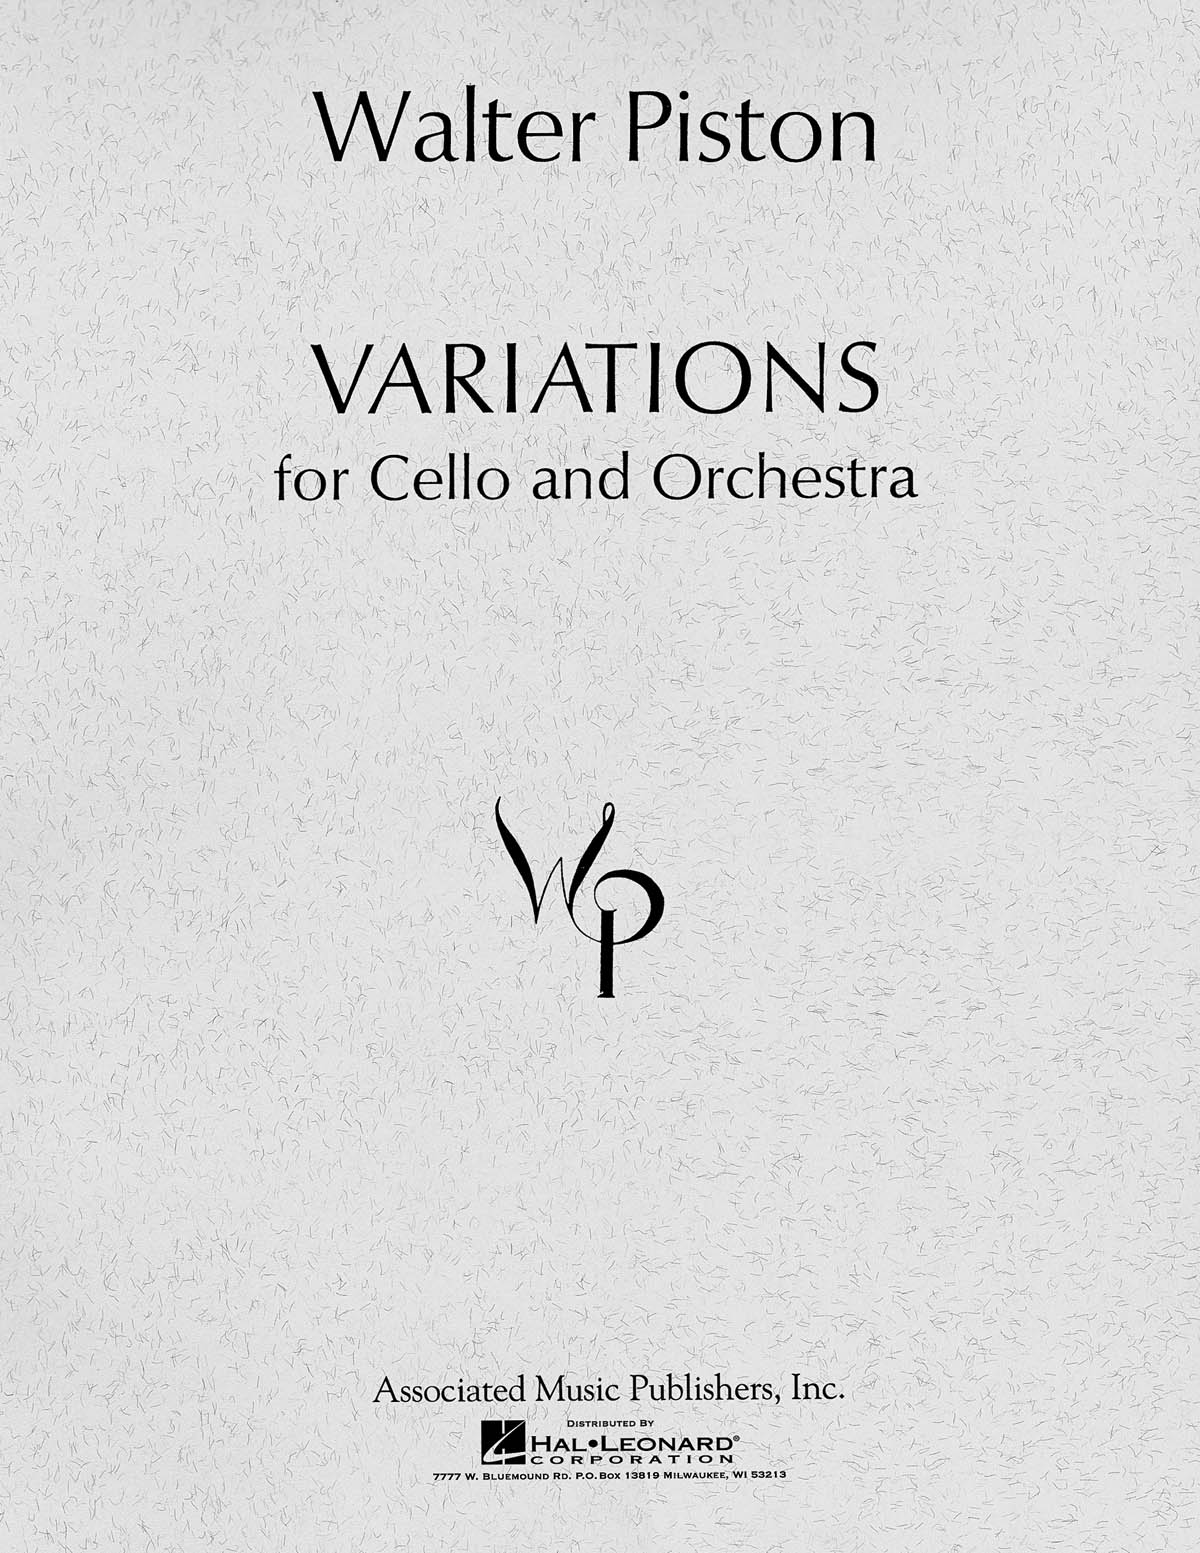 Walter Piston: Variations for Cello and Orchestra